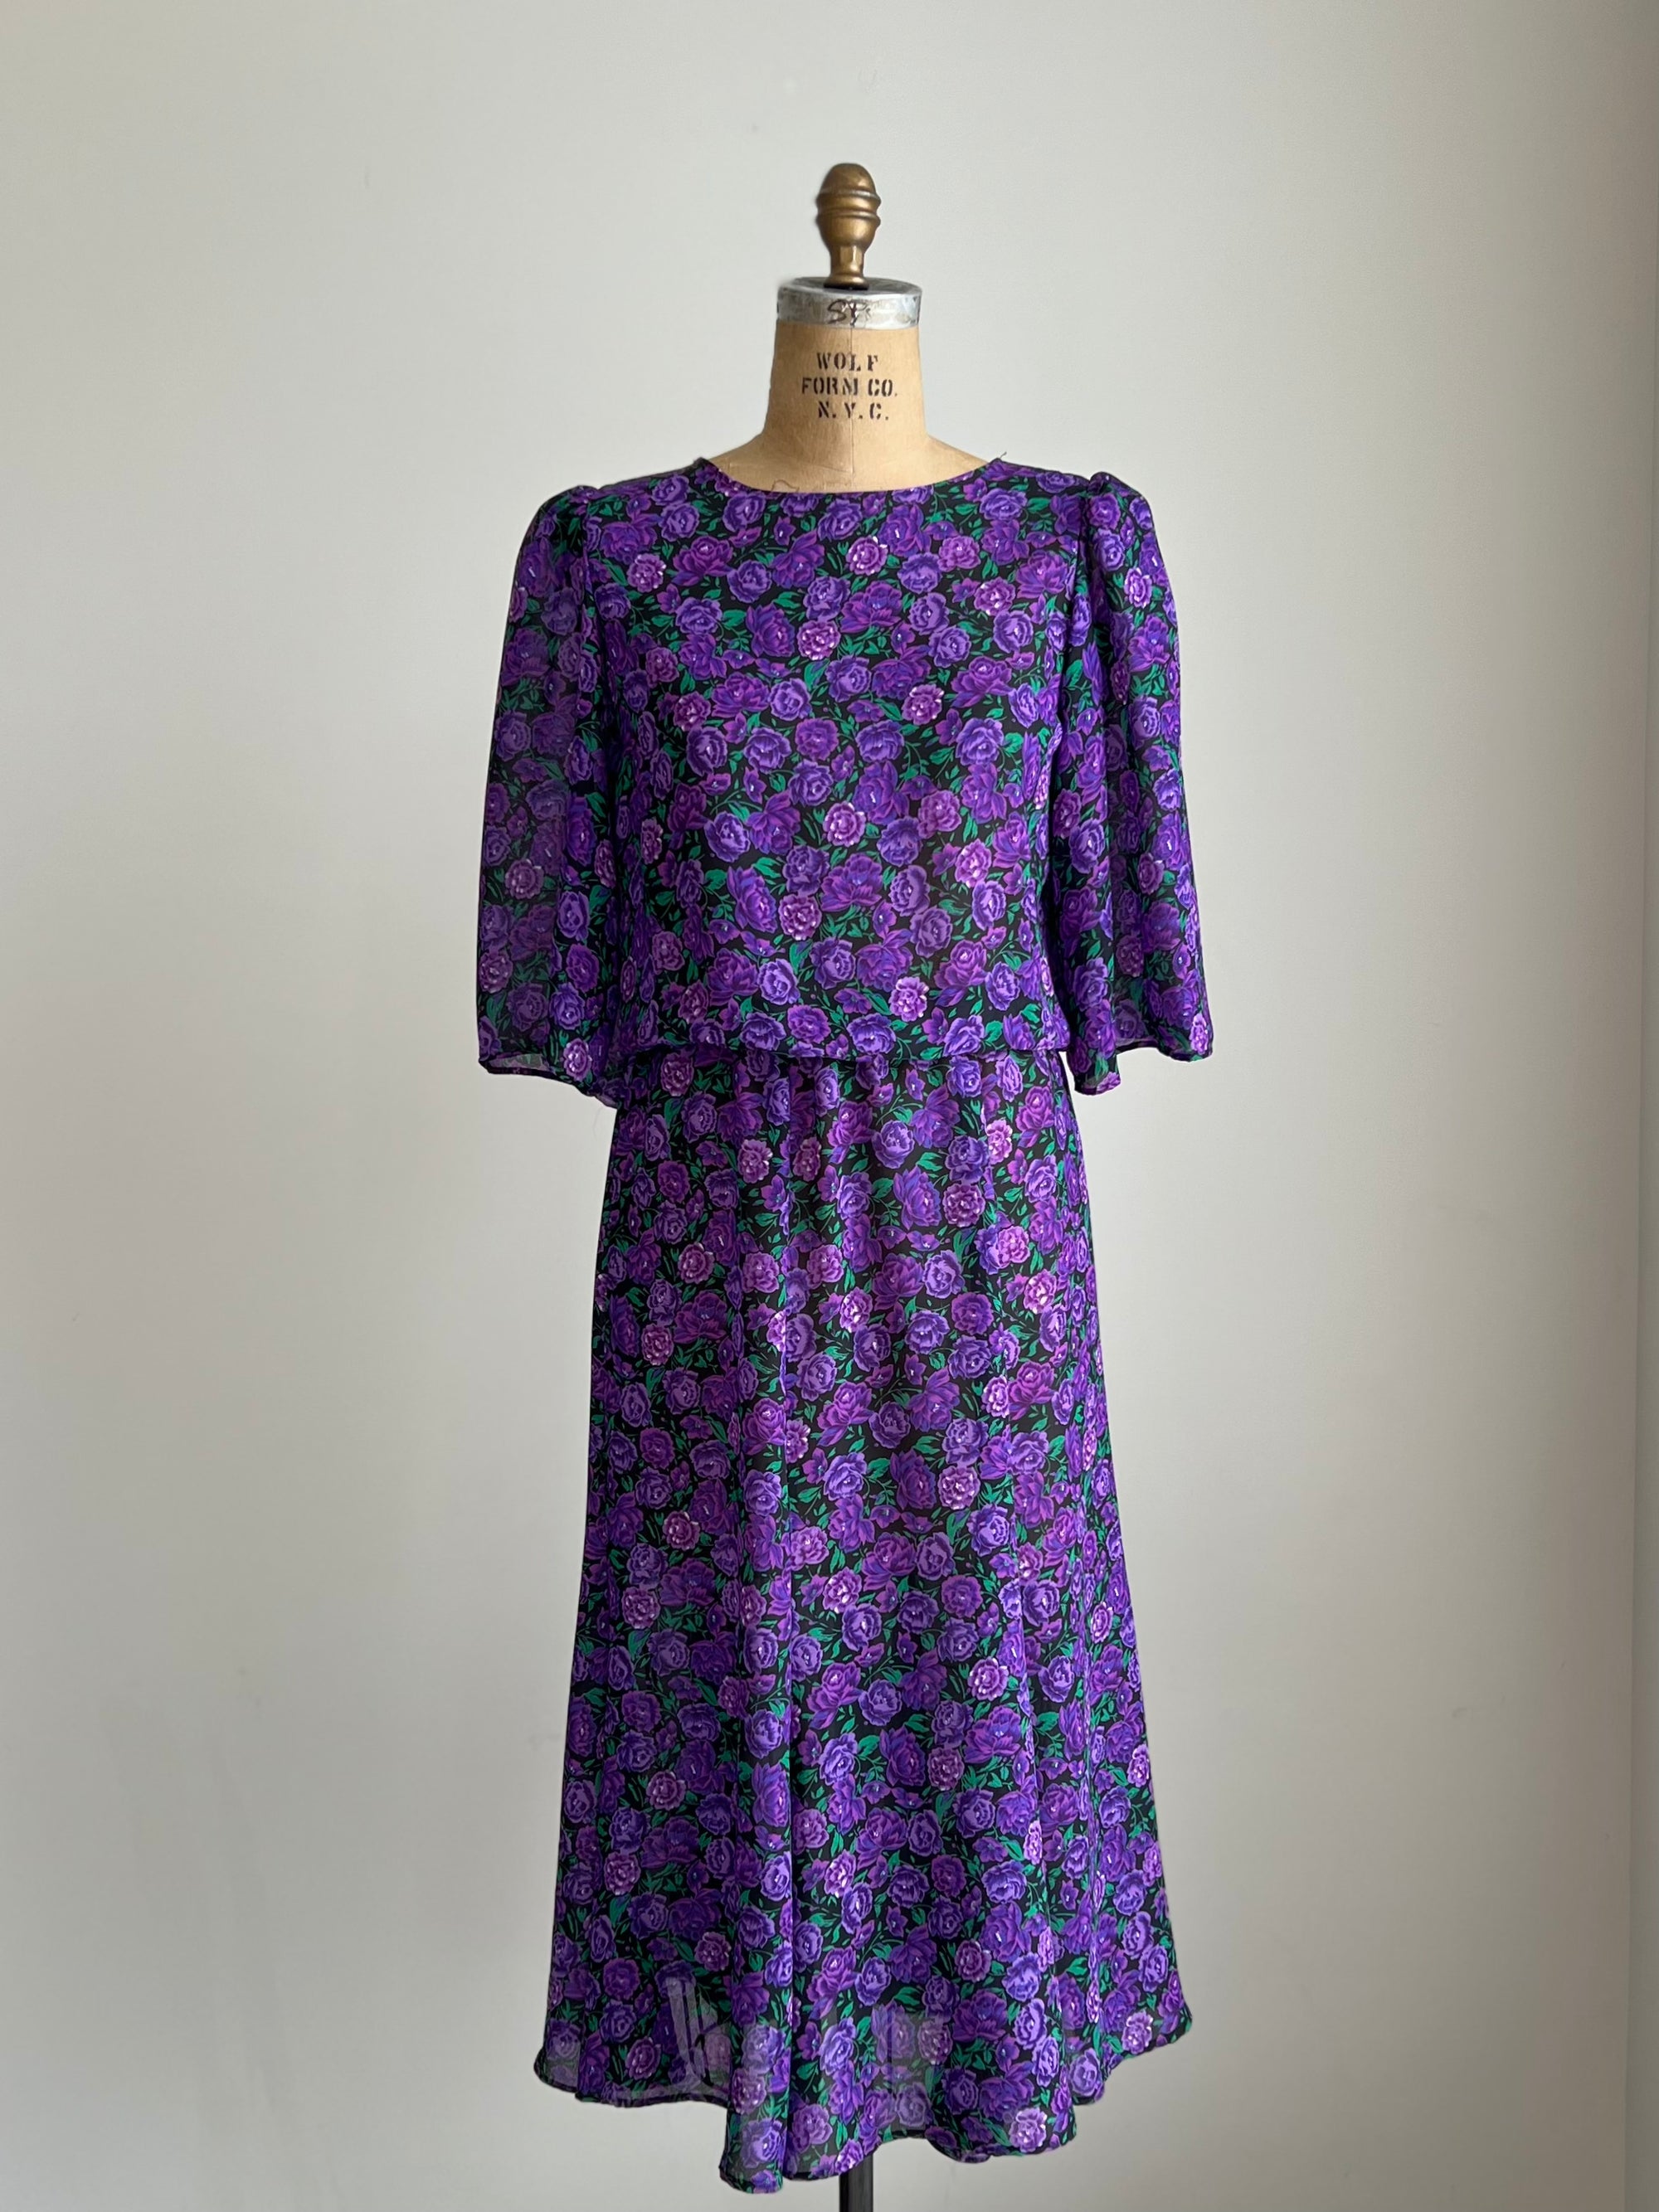 1970s Toni Todd Purple Rose Bud Garden Dress with Flutter Sleeves S/M